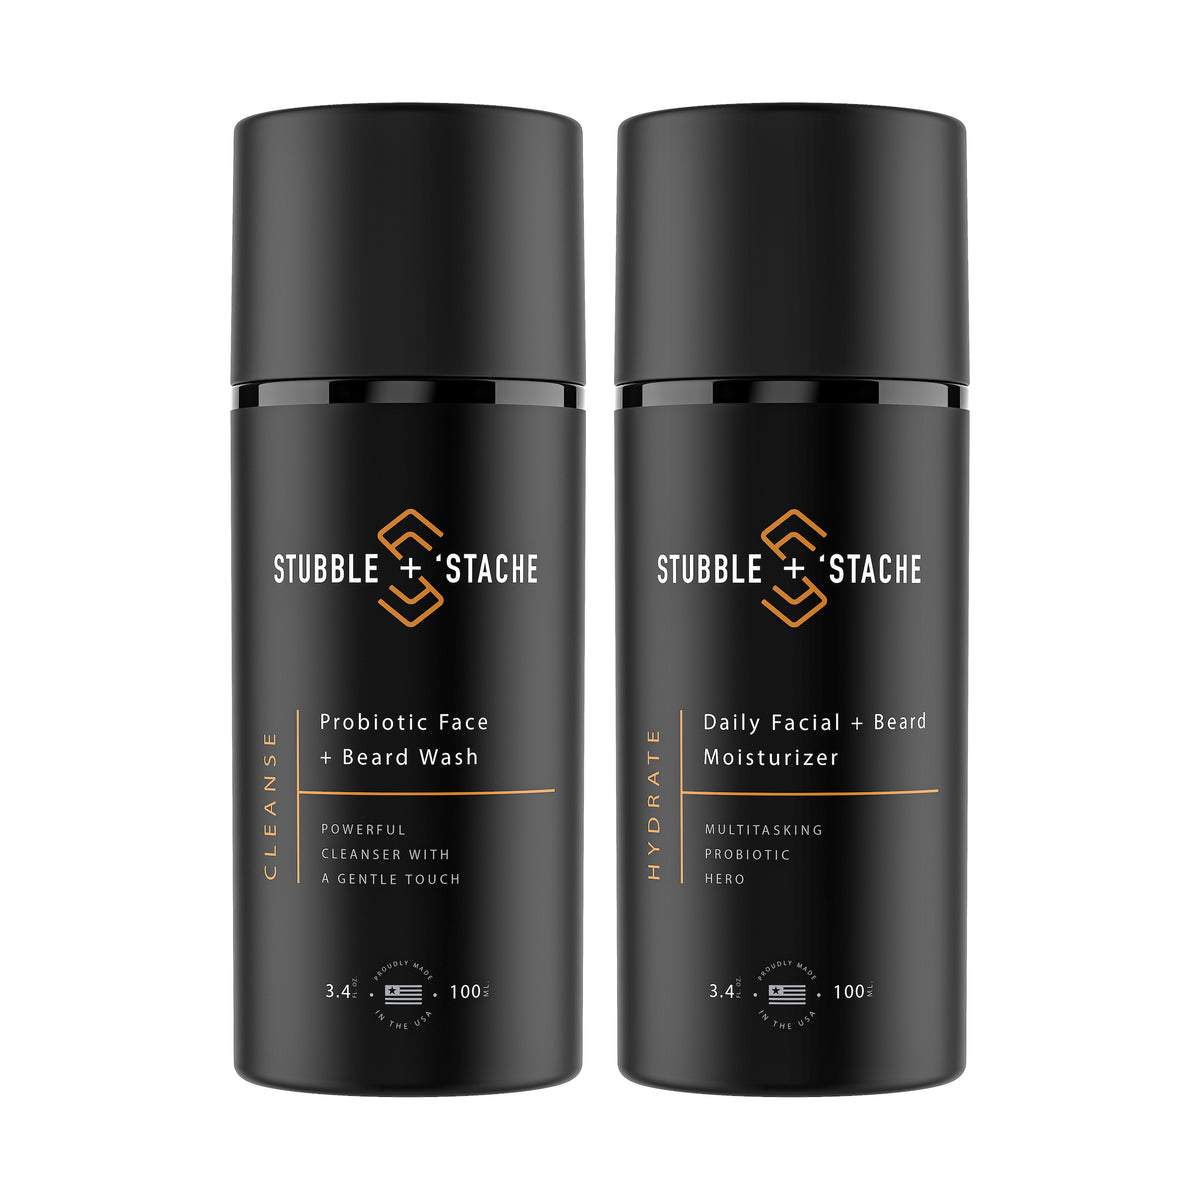 Beard Care Starter Kit. One 3.4 fl oz airless pump of Hydrate Daily Probiotic Facial + Beard Moisturizer and one 3.4 fl oz airless pump of Cleanse: Probiotic Face + Beard Wash by stubble + &#39;stache